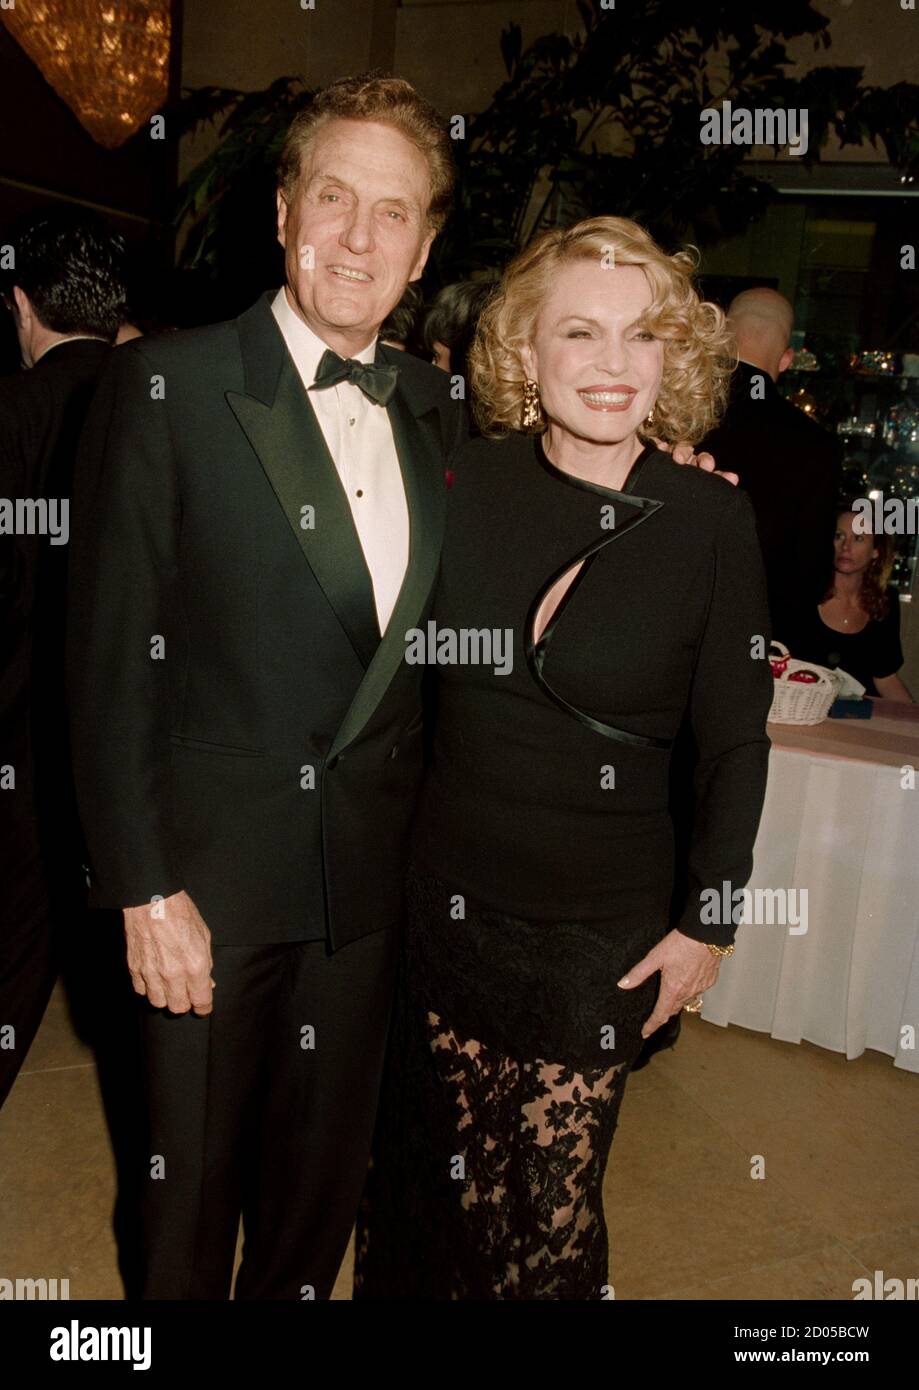 ARCHIVE: LOS ANGELES, CA. March 11, 1995: Actor Robert Stack & wife Rosemarie Stack at the 1995 Directors Guild of America Awards in Beverly Hills. File photo © Paul Smith/Featureflash Stock Photo